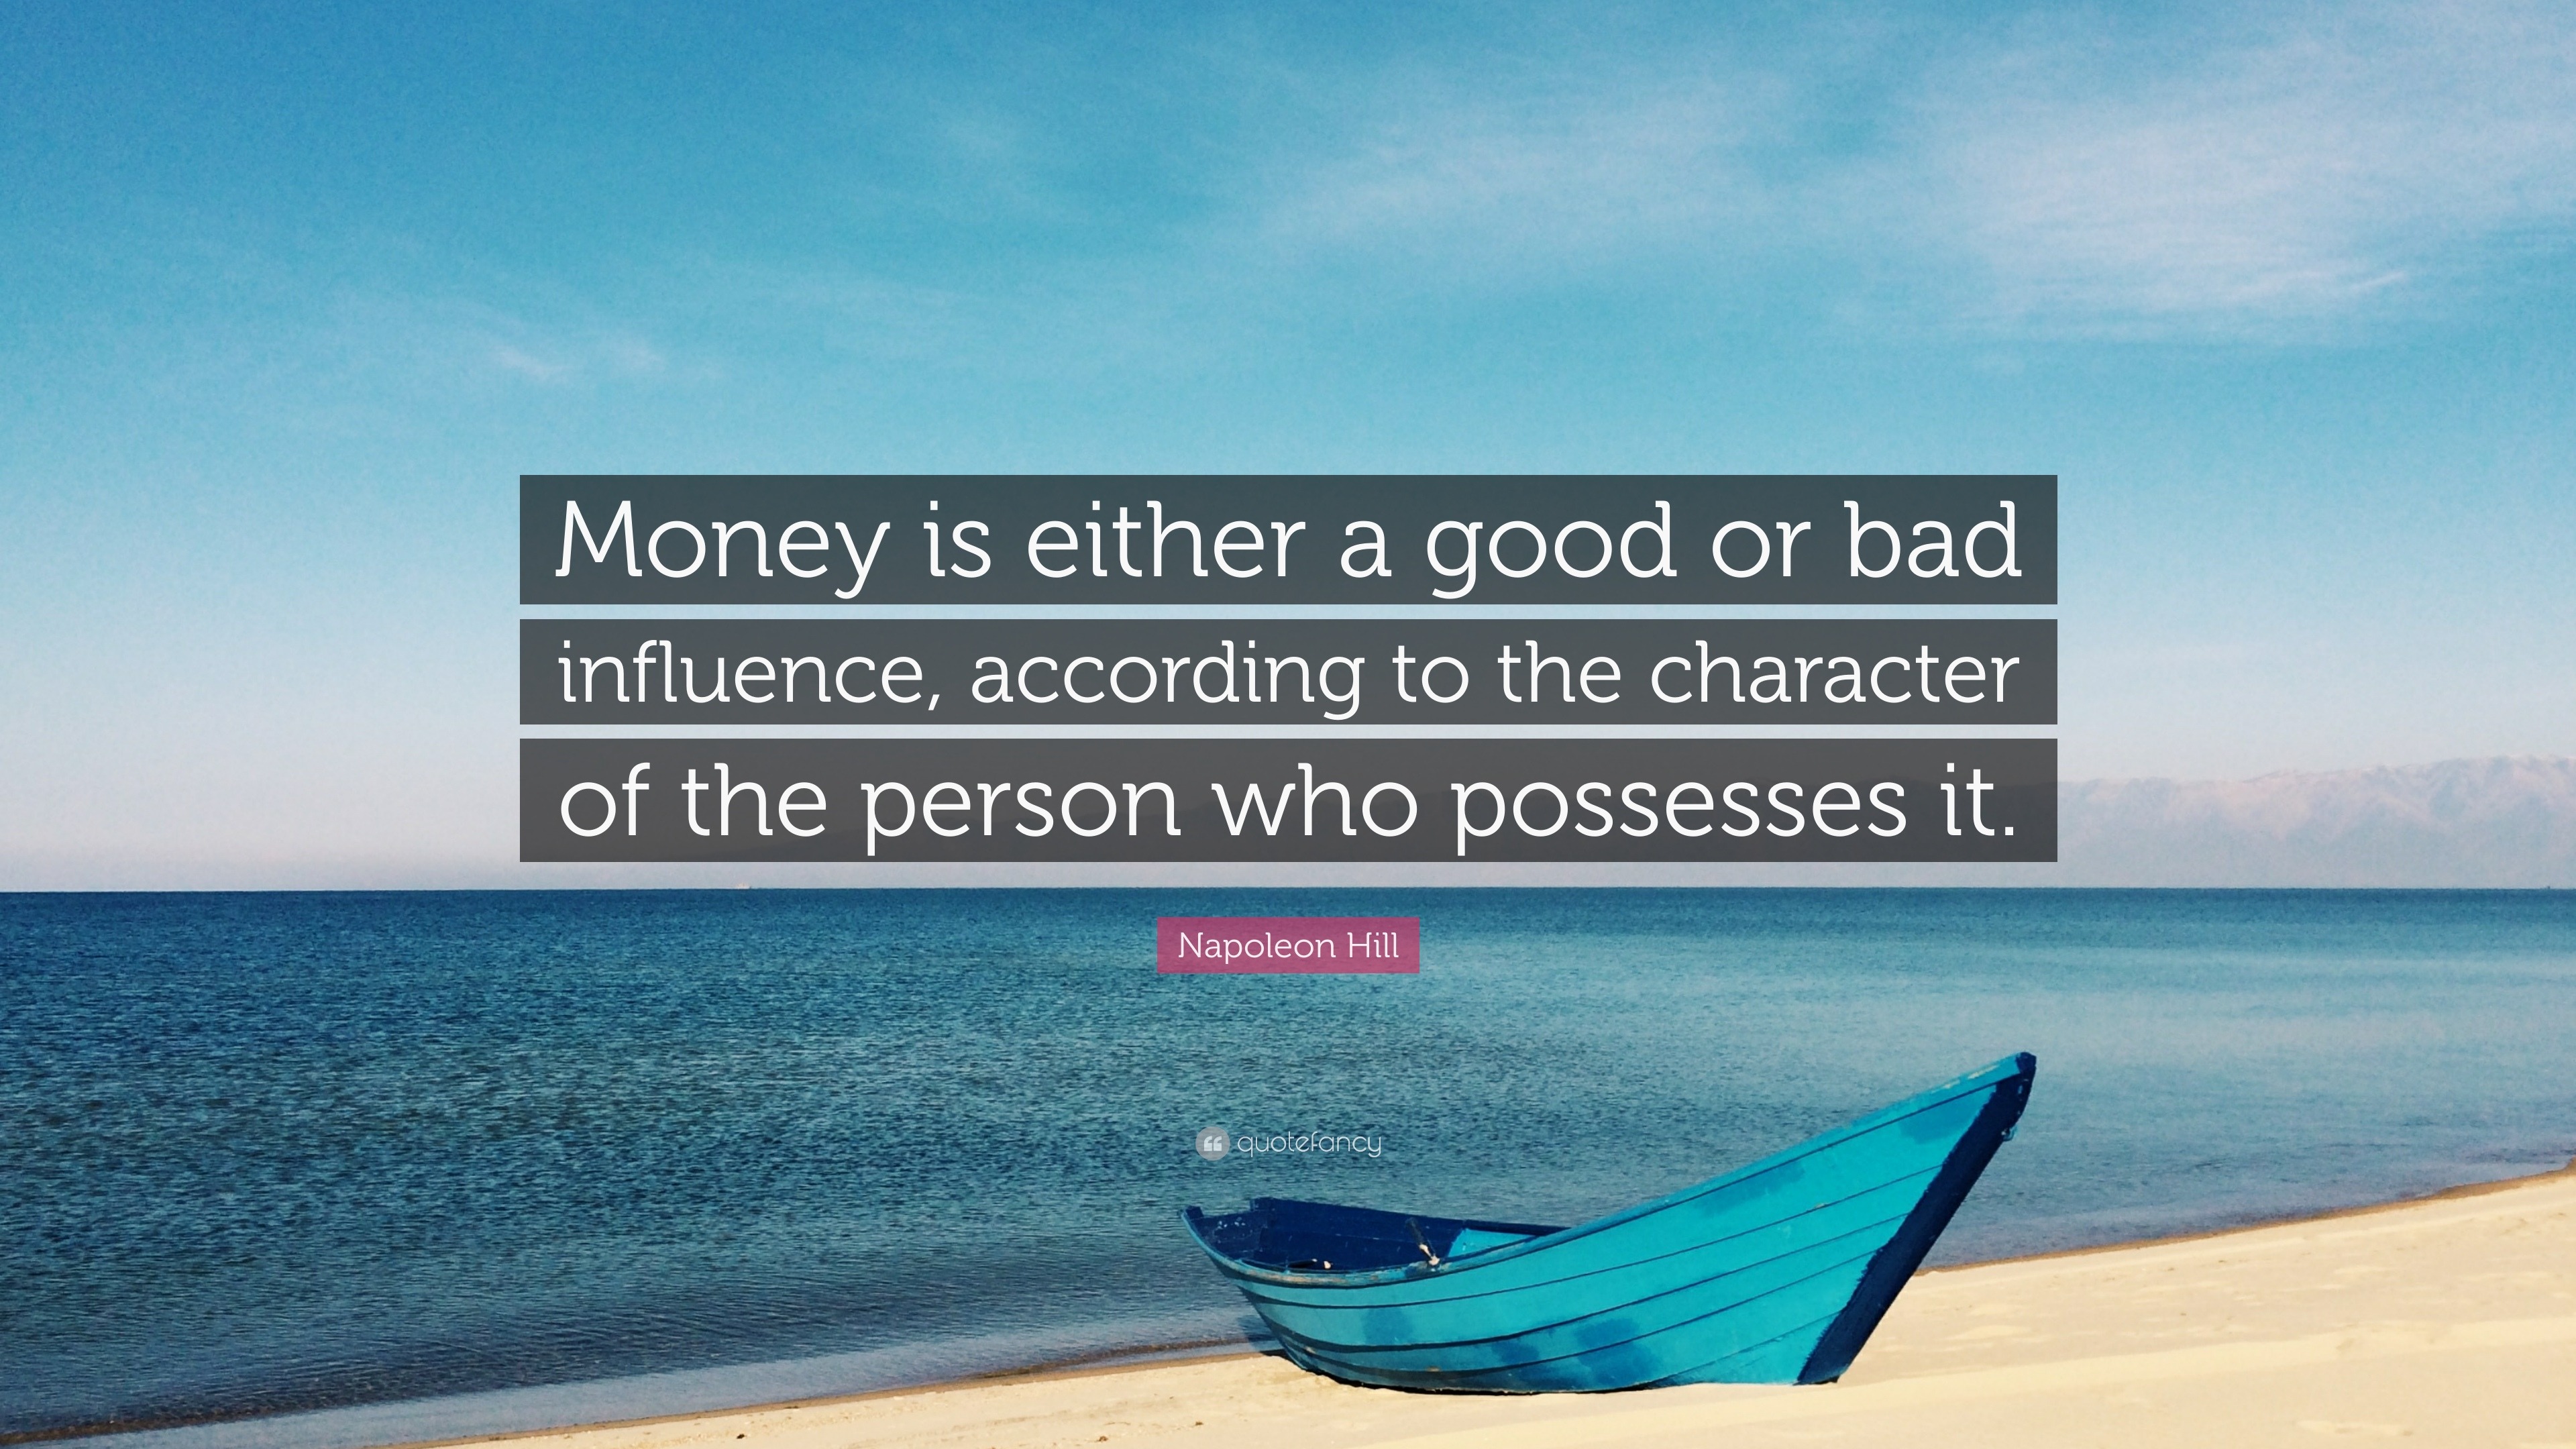 Is money good or bad?